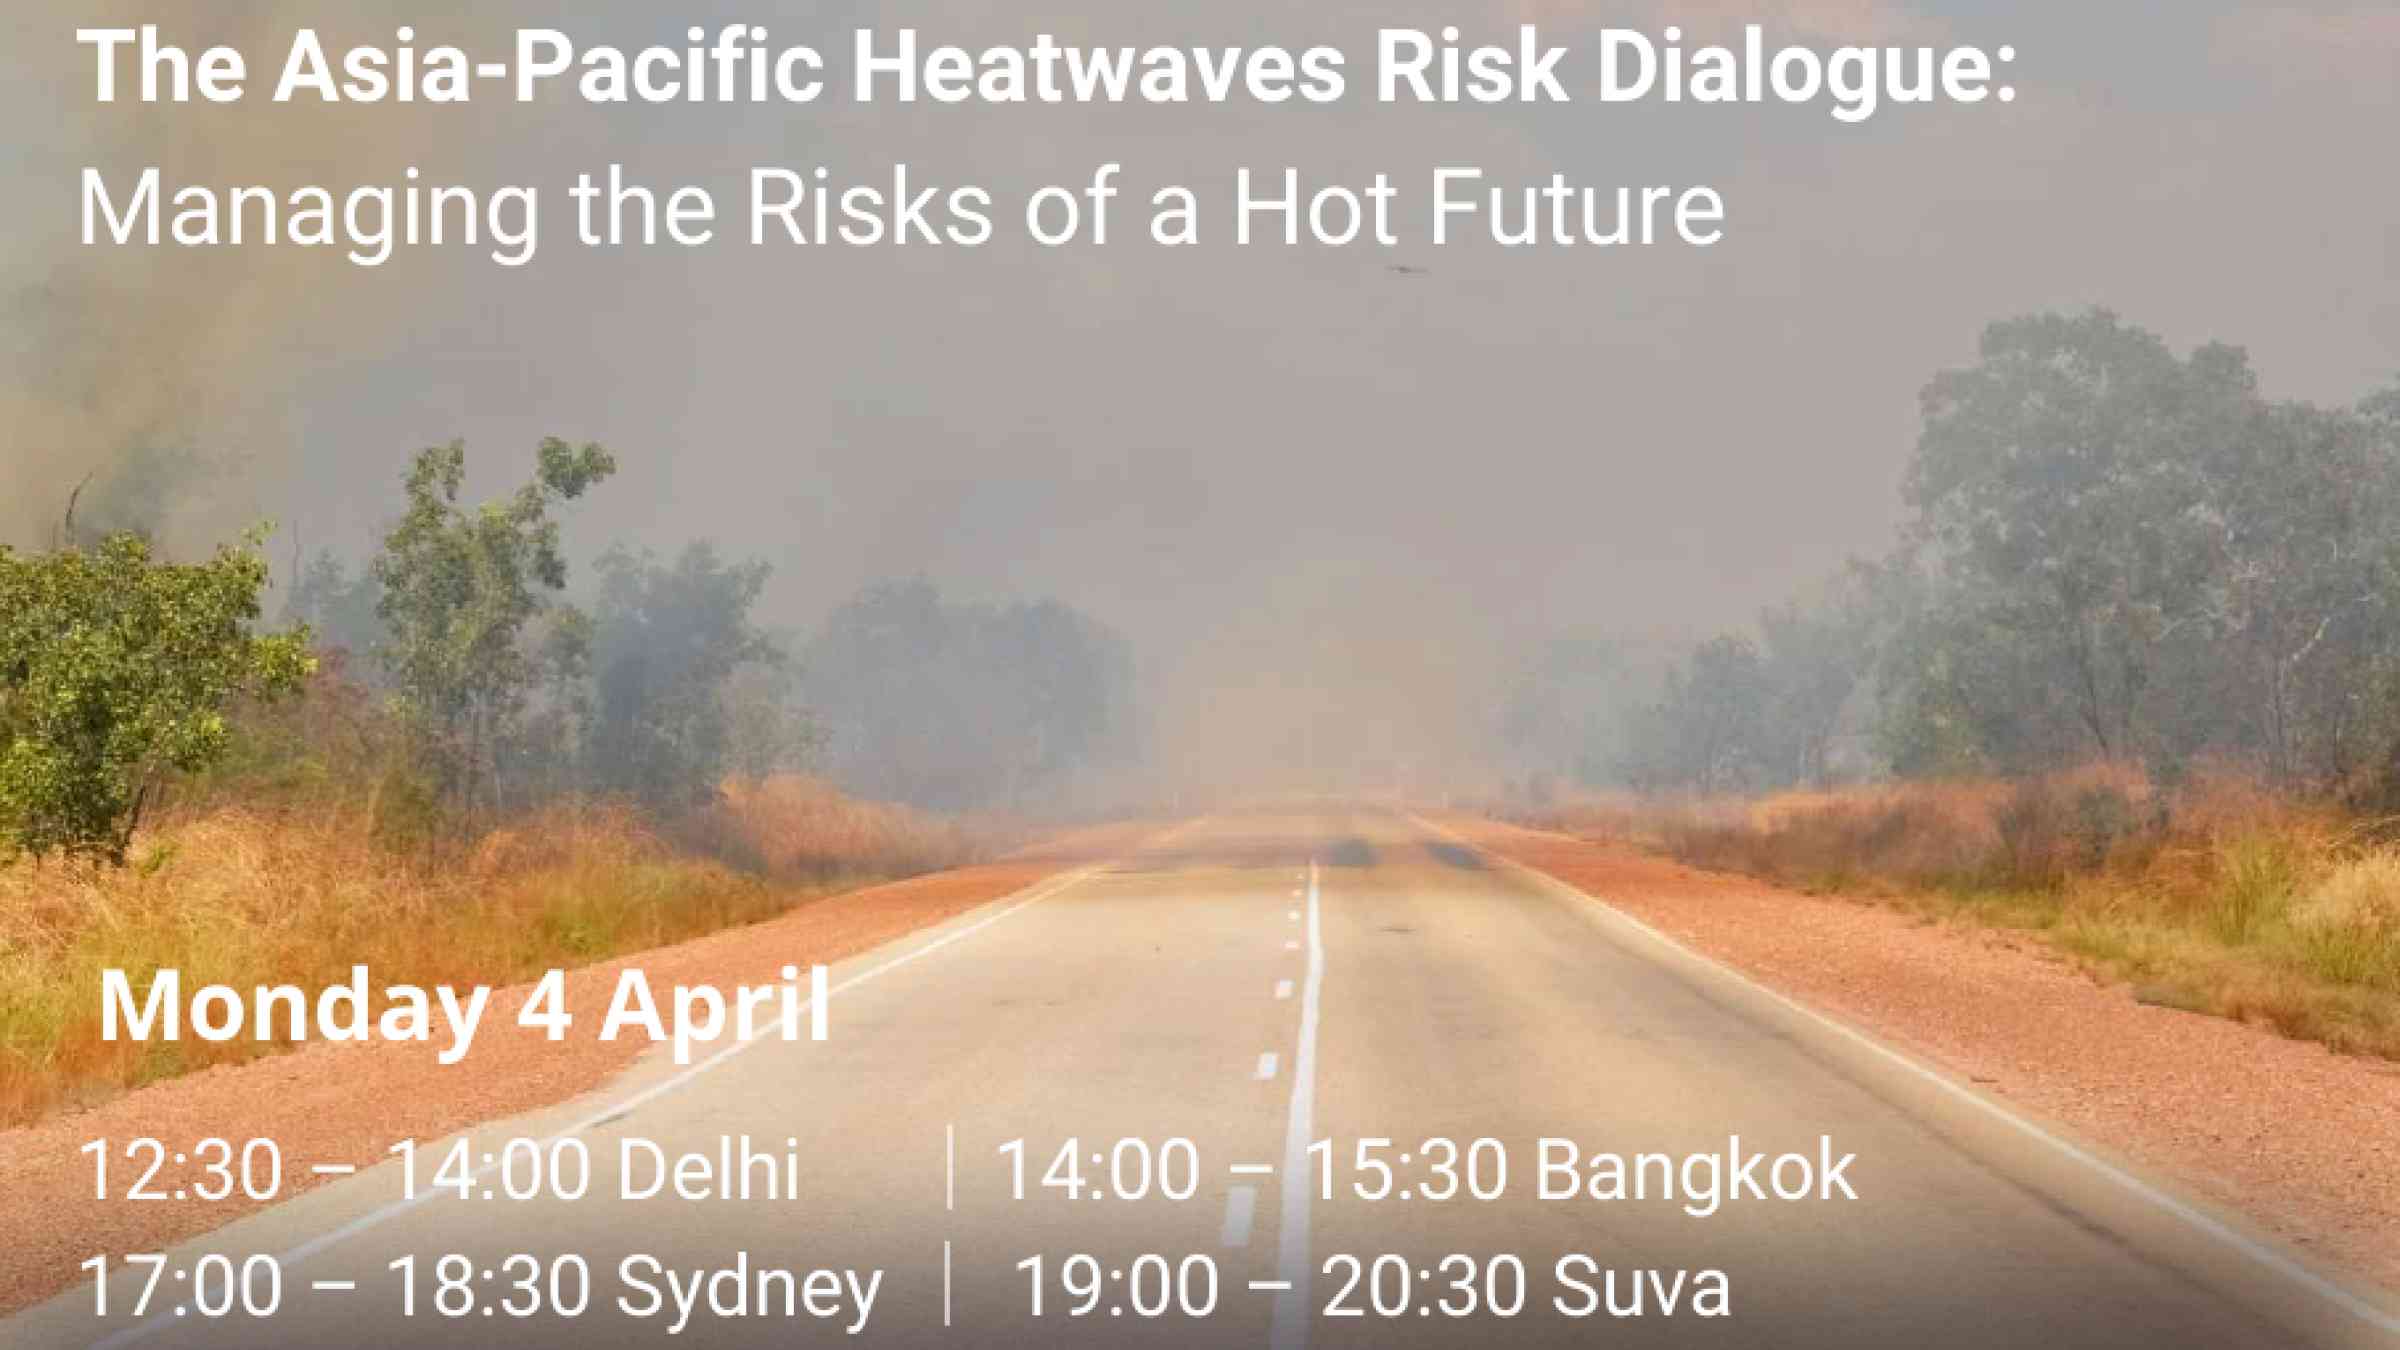 The Asia-Pacific Heatwaves Risk Dialogue Managing the Risks of a Hot Future 